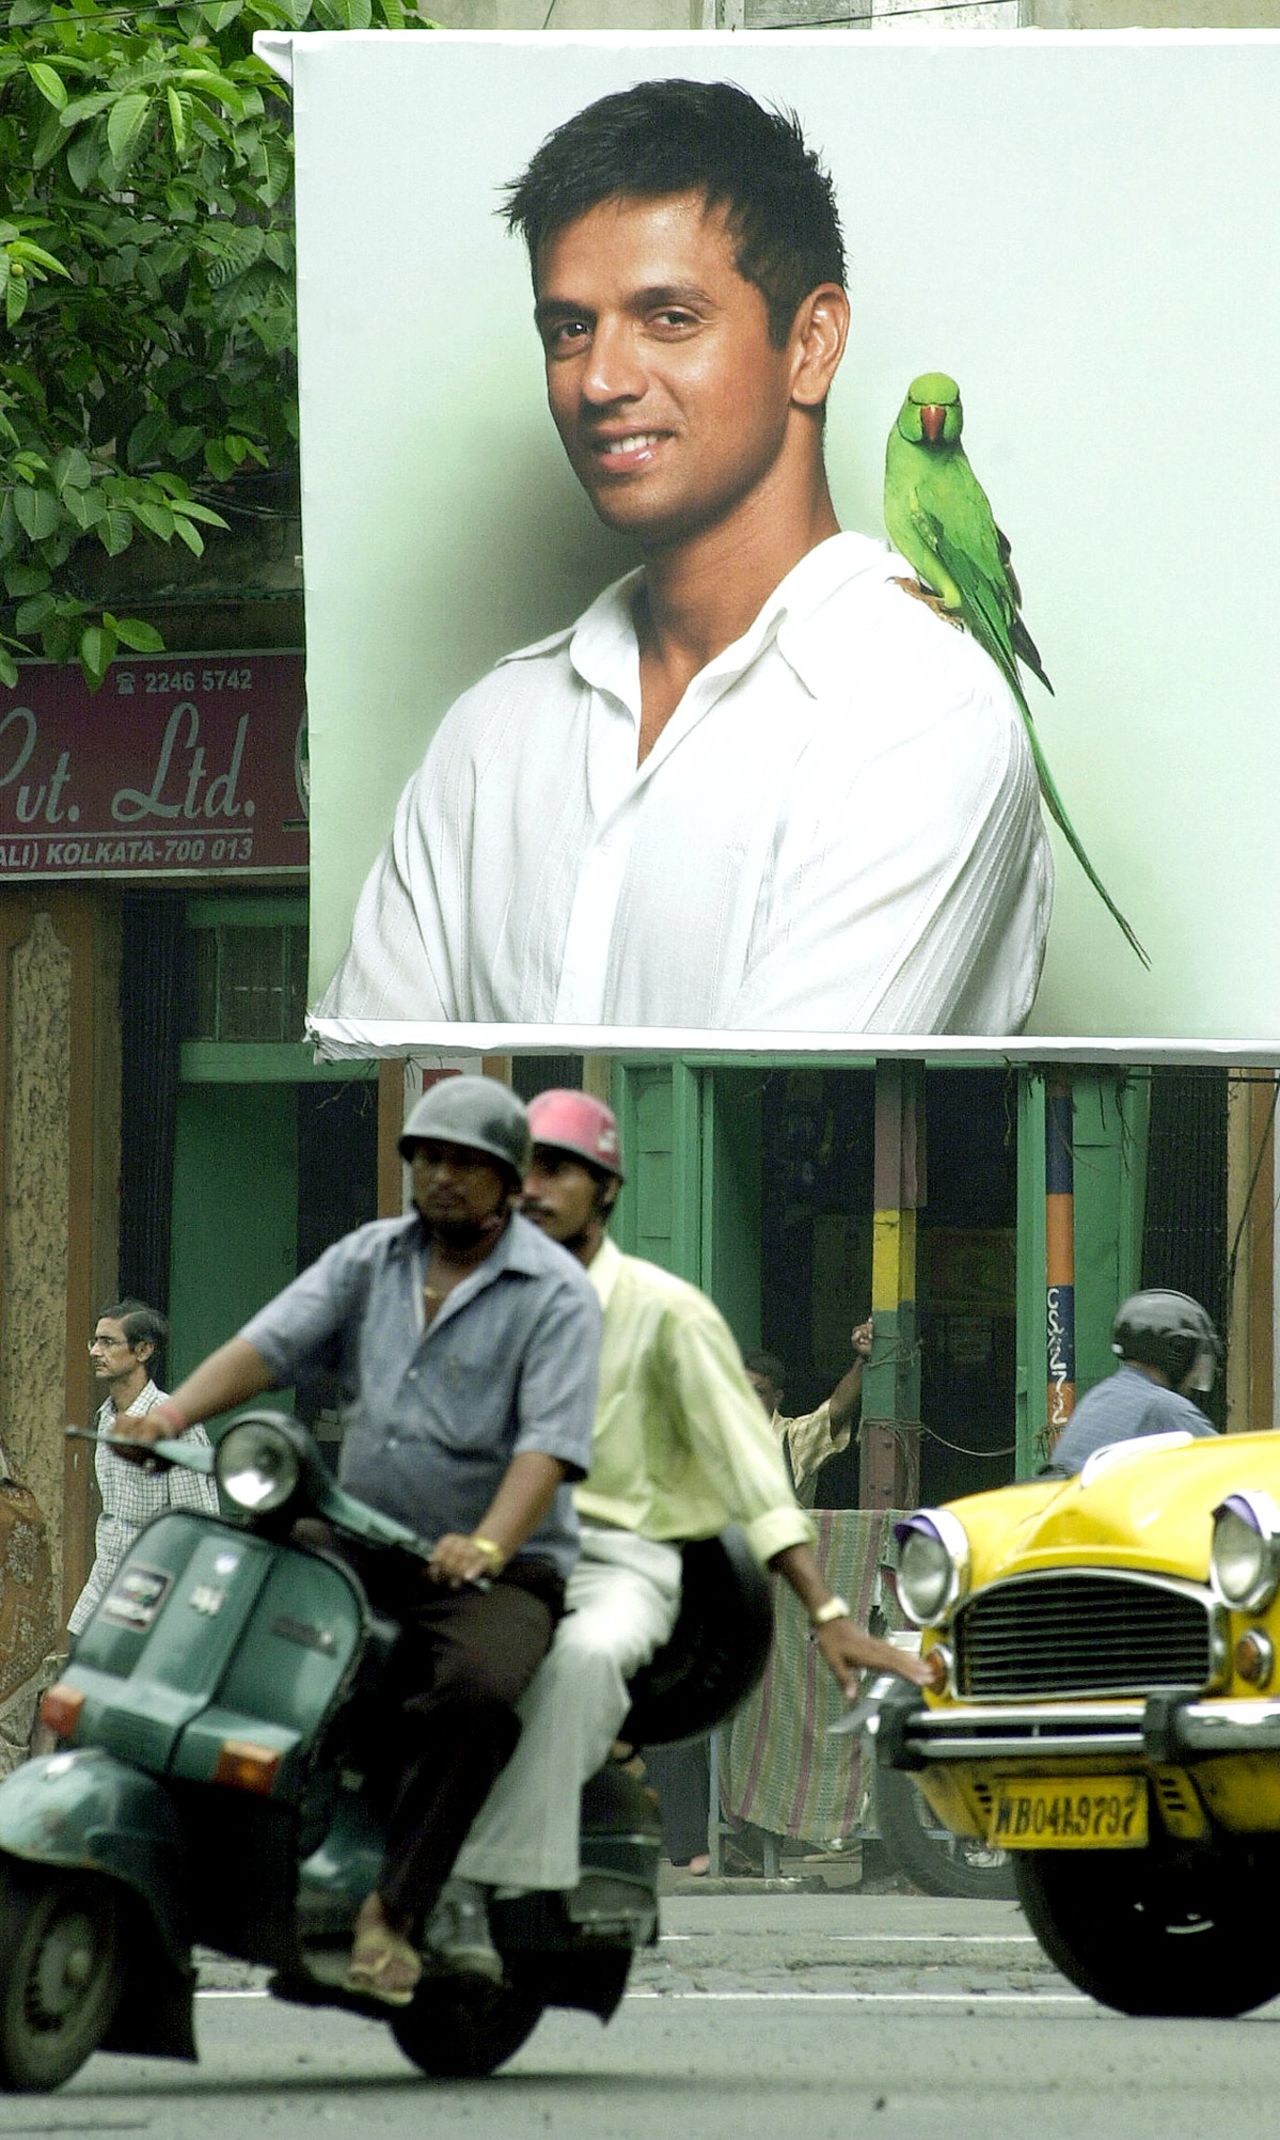 Two men on a scooter ride past a billboard featuring Rahul Dravid, Kolkata,July 16, 2004